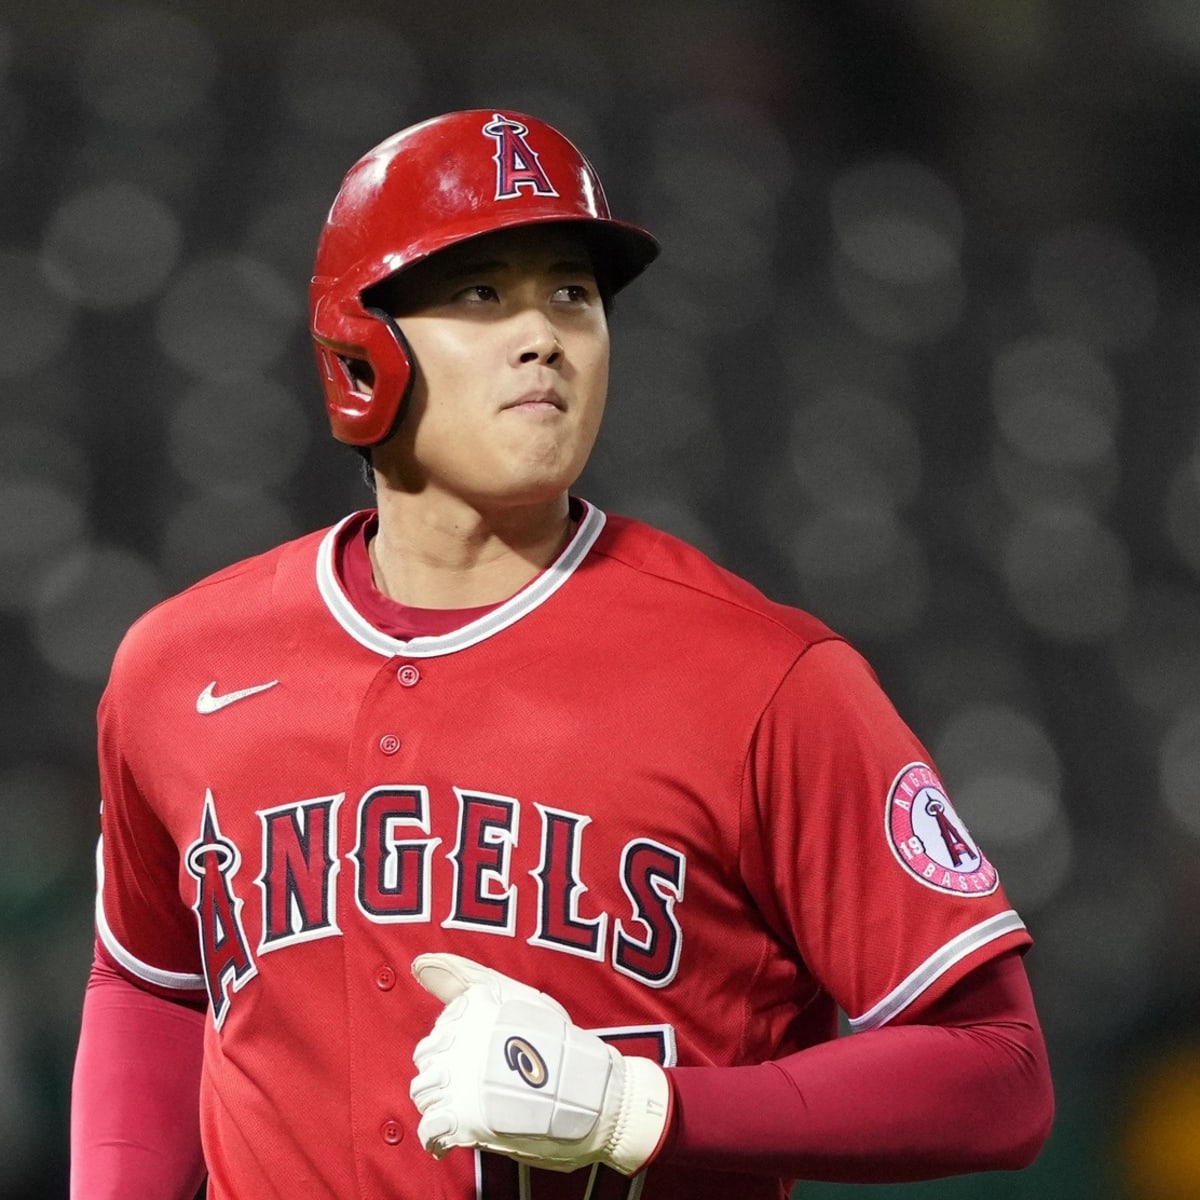 Father of MLB-bound Ohtani wants son to remain honest in baseball